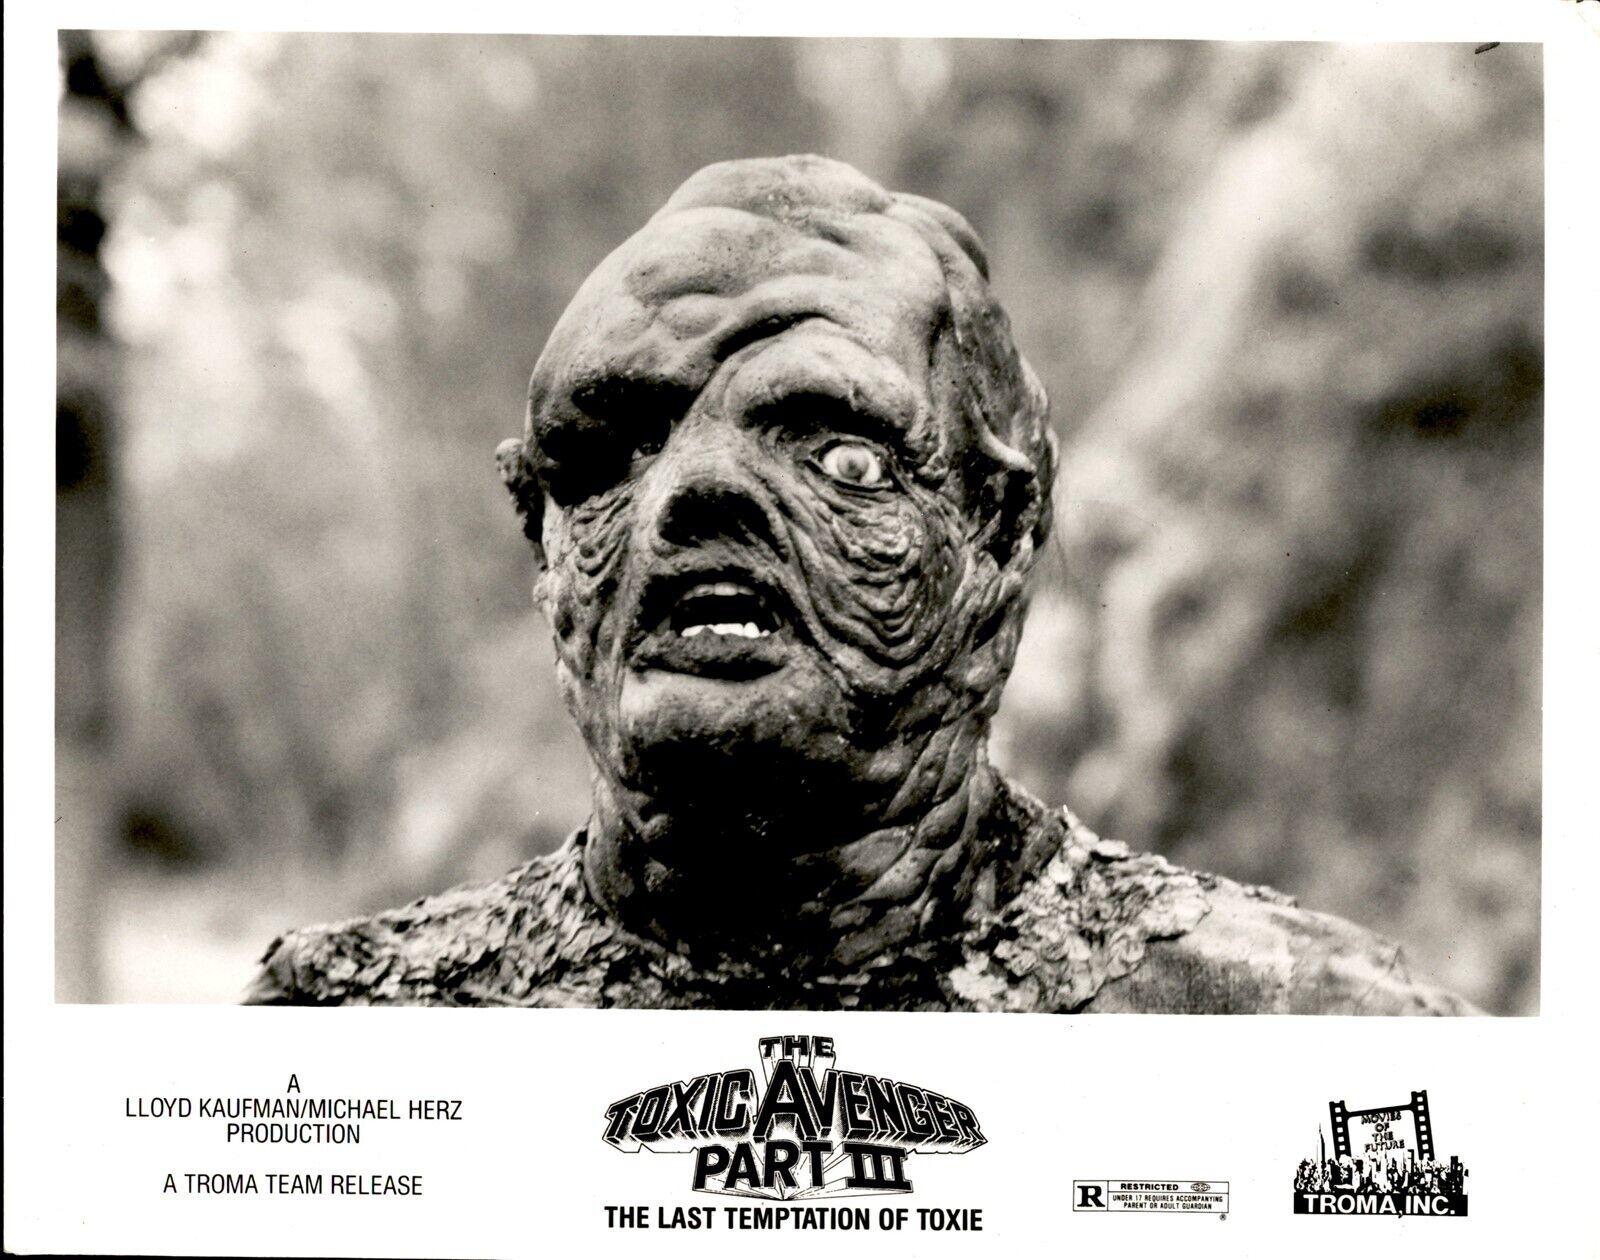 BR1 Original Photo THE TOXIC AVENGER PART III Ron Fazio Special Effects Monster